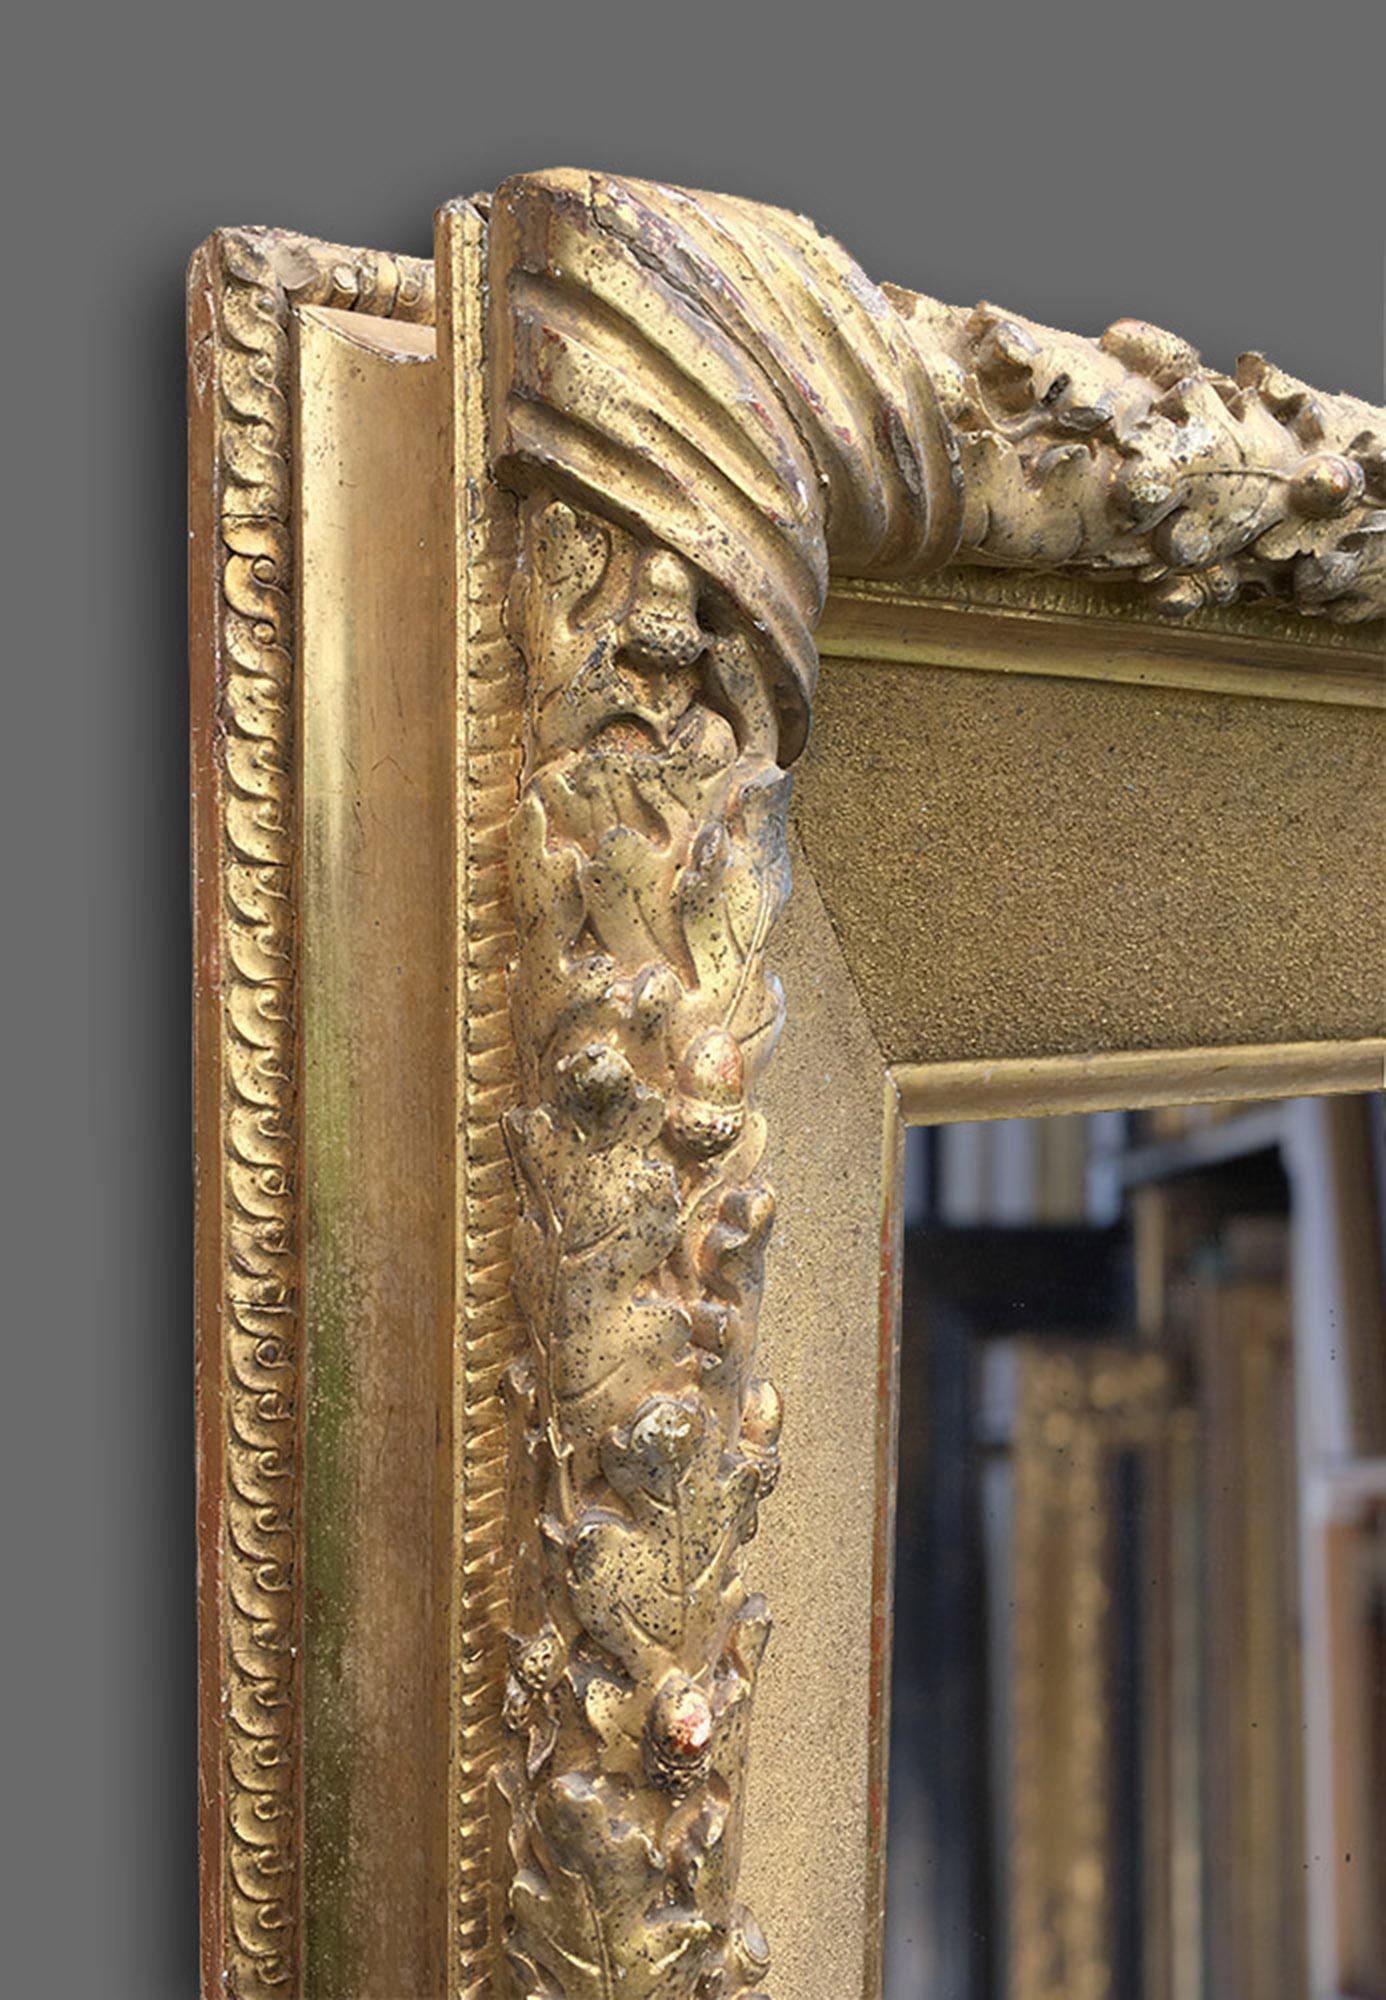 A fine and rare pair of handmade late 19th century French 'Salon' frames. They have canted architrave profile, with torus of molded imbricated oak leaves and acorns.

The frame retains its well preserved original matt and burnished water